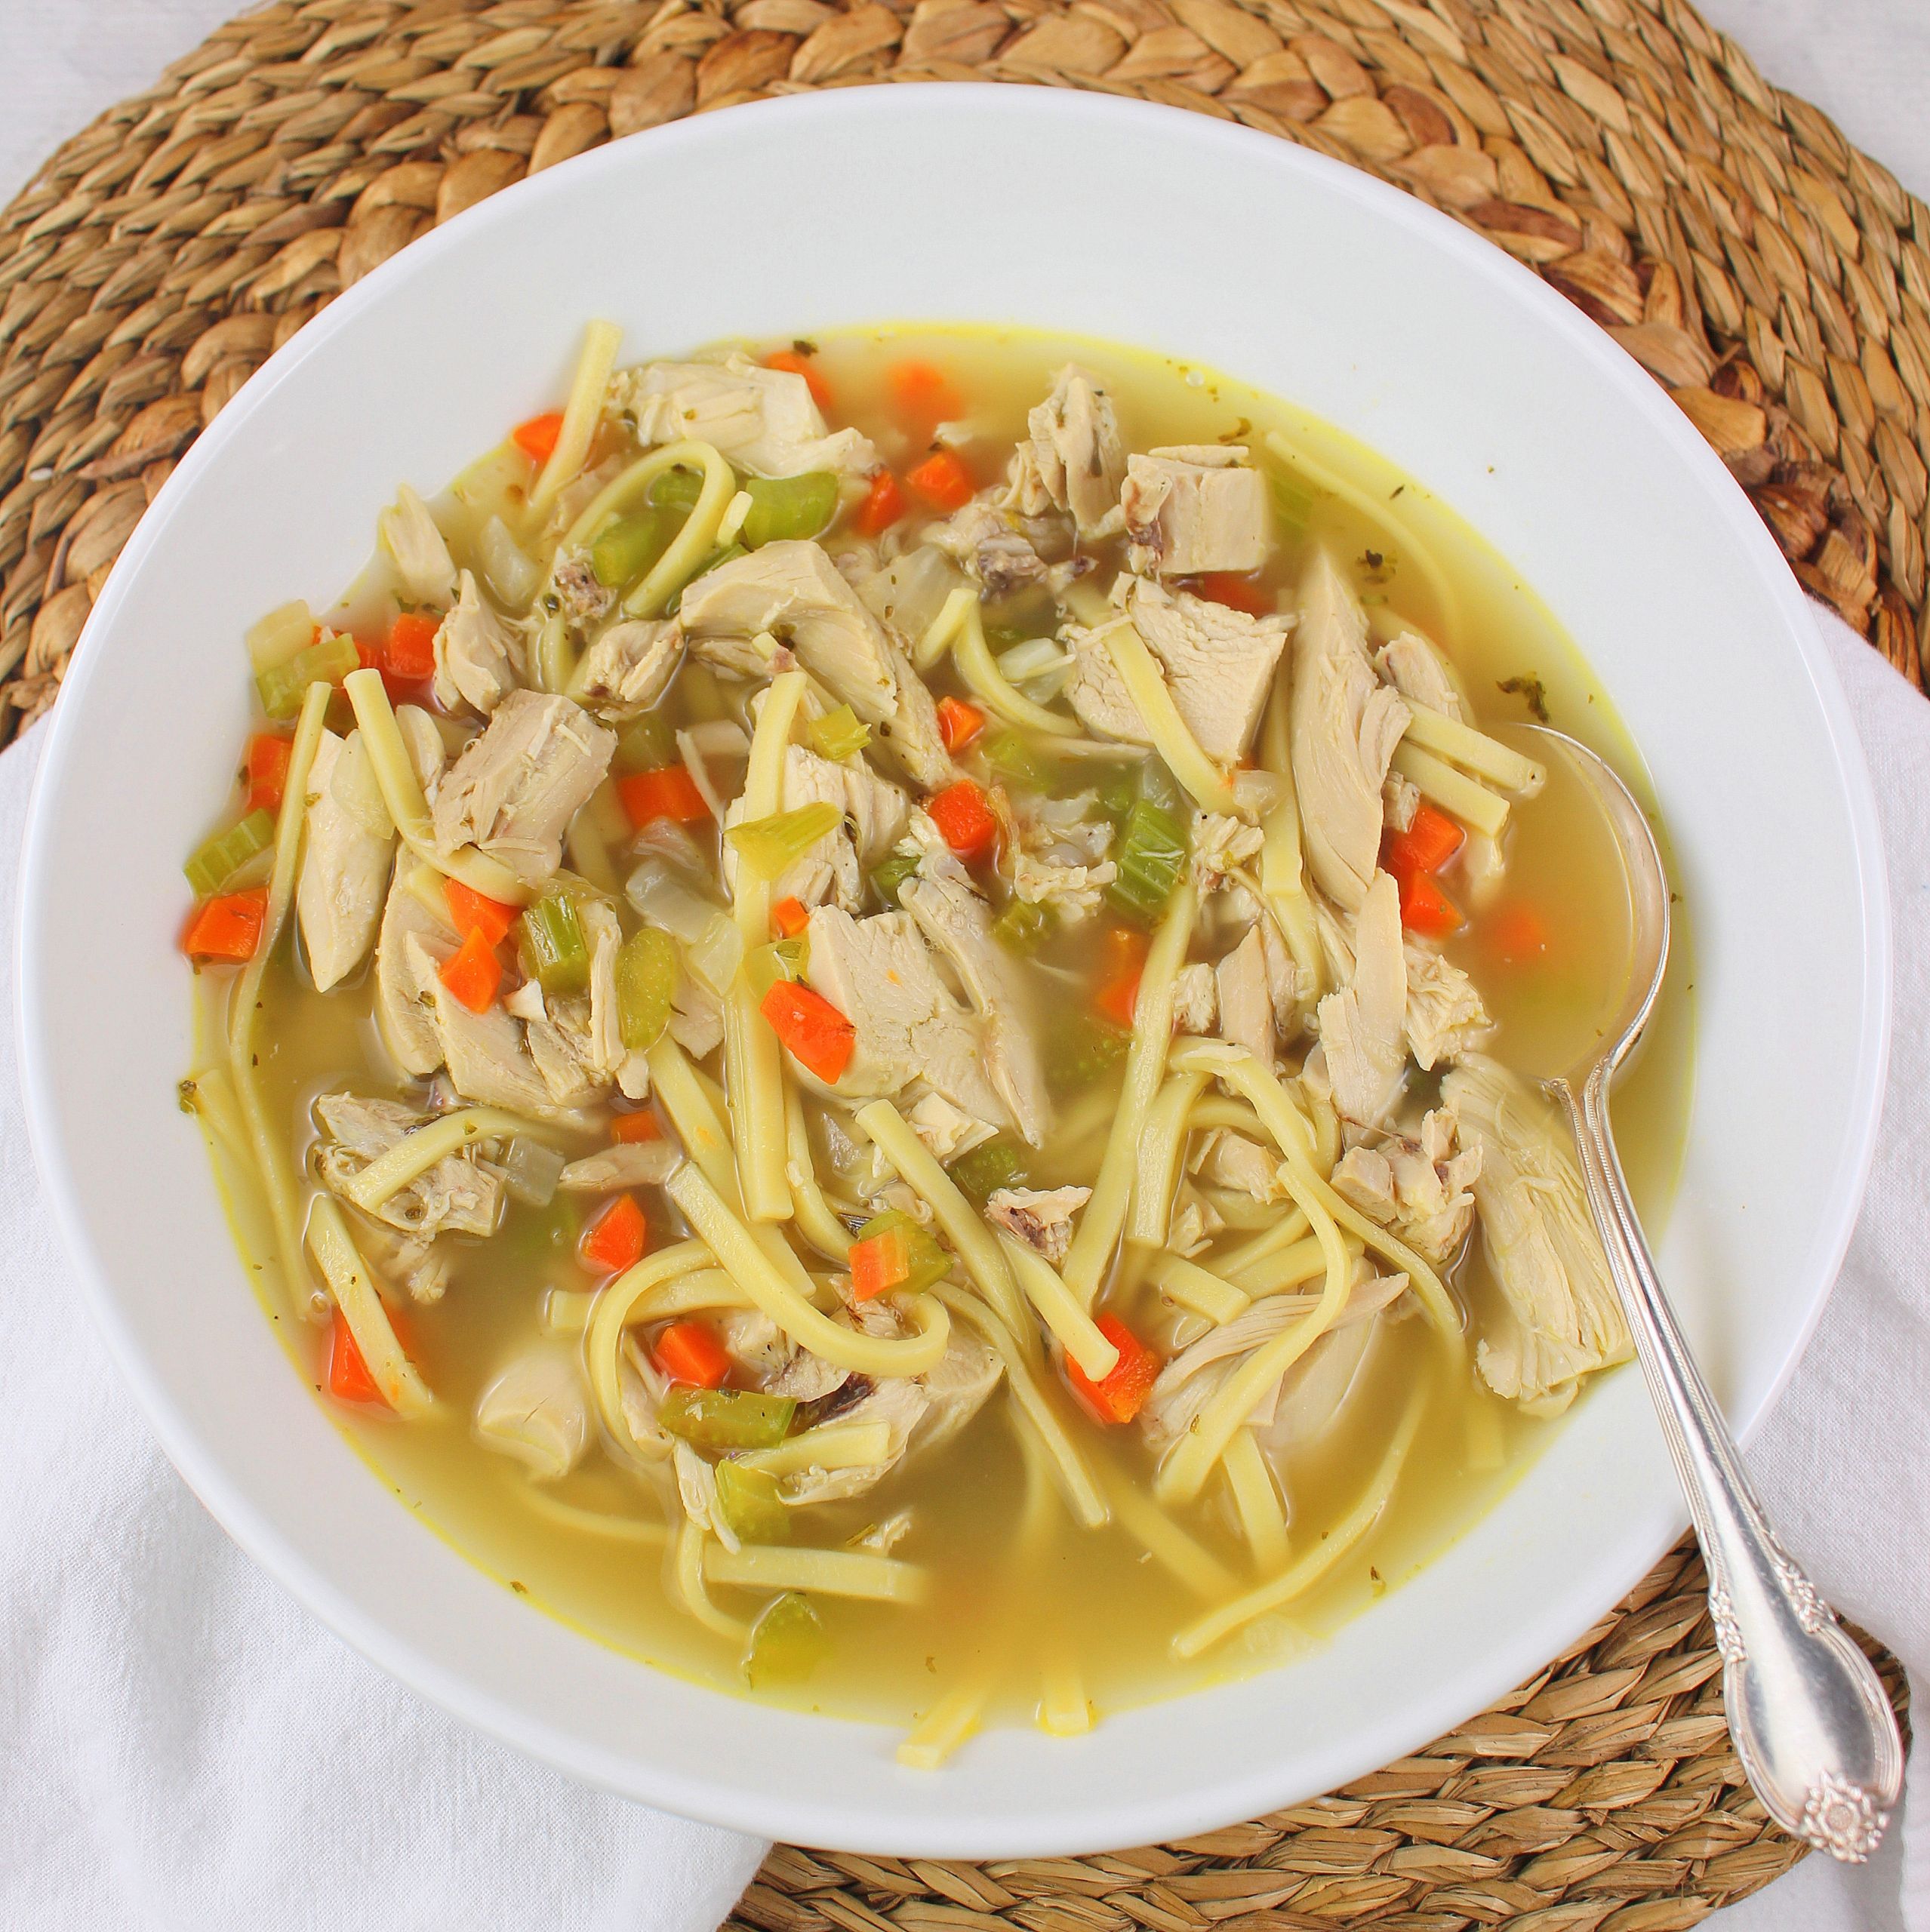 Chicken Noodle Soup Homemade
 Homemade Chicken Noodle Soup